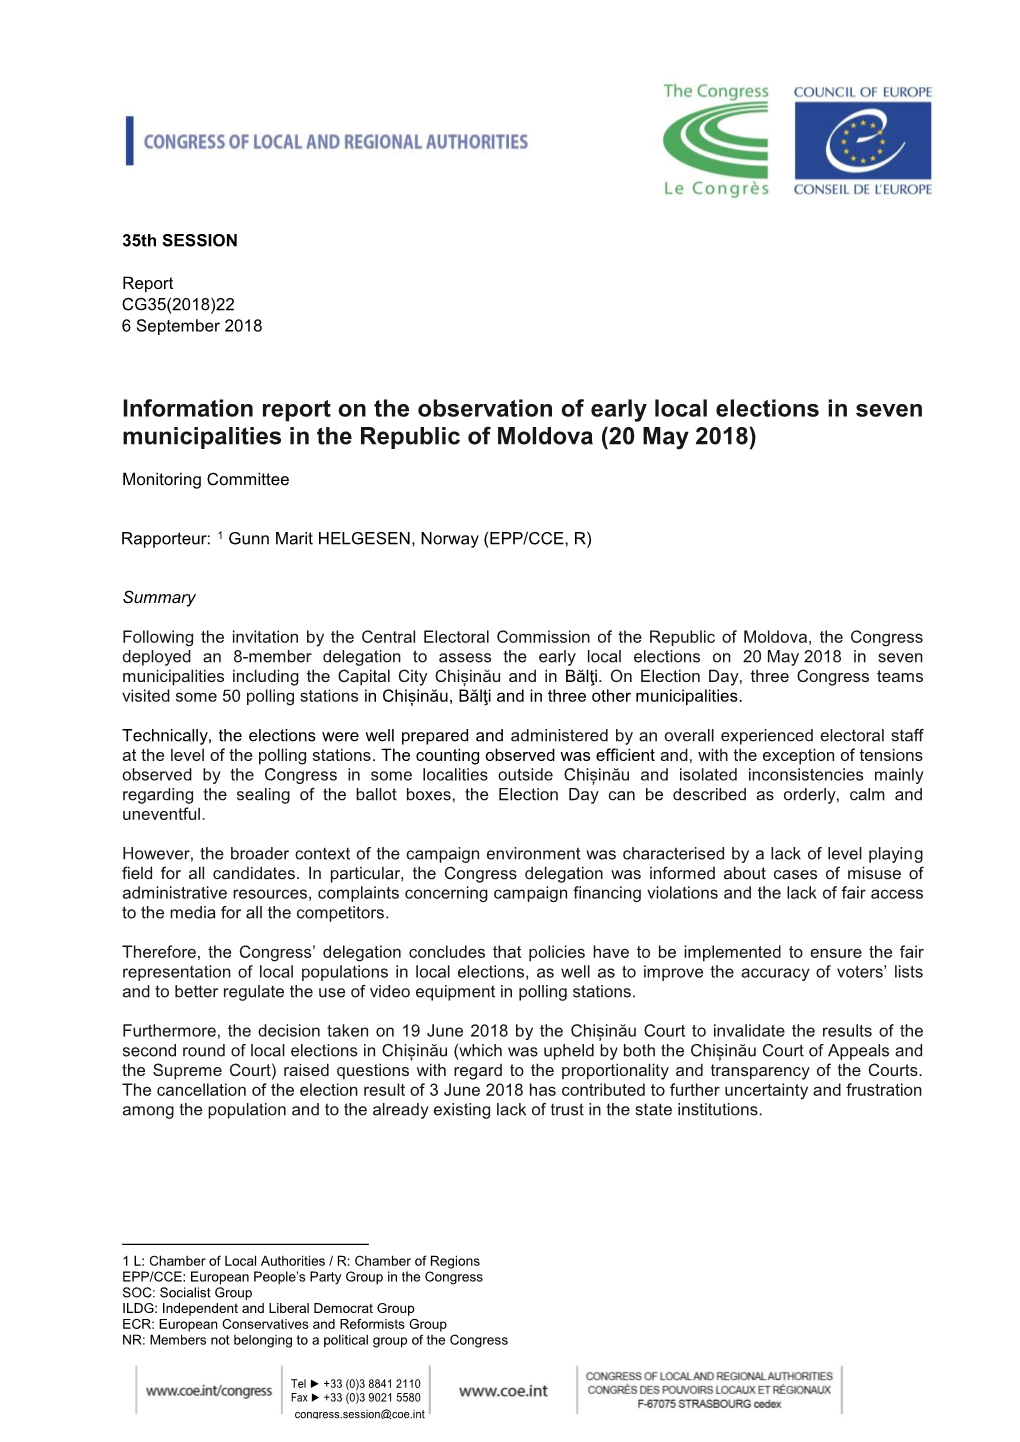 Information Report on the Observation of Early Local Elections in Seven Municipalities in the Republic of Moldova (20 May 2018)